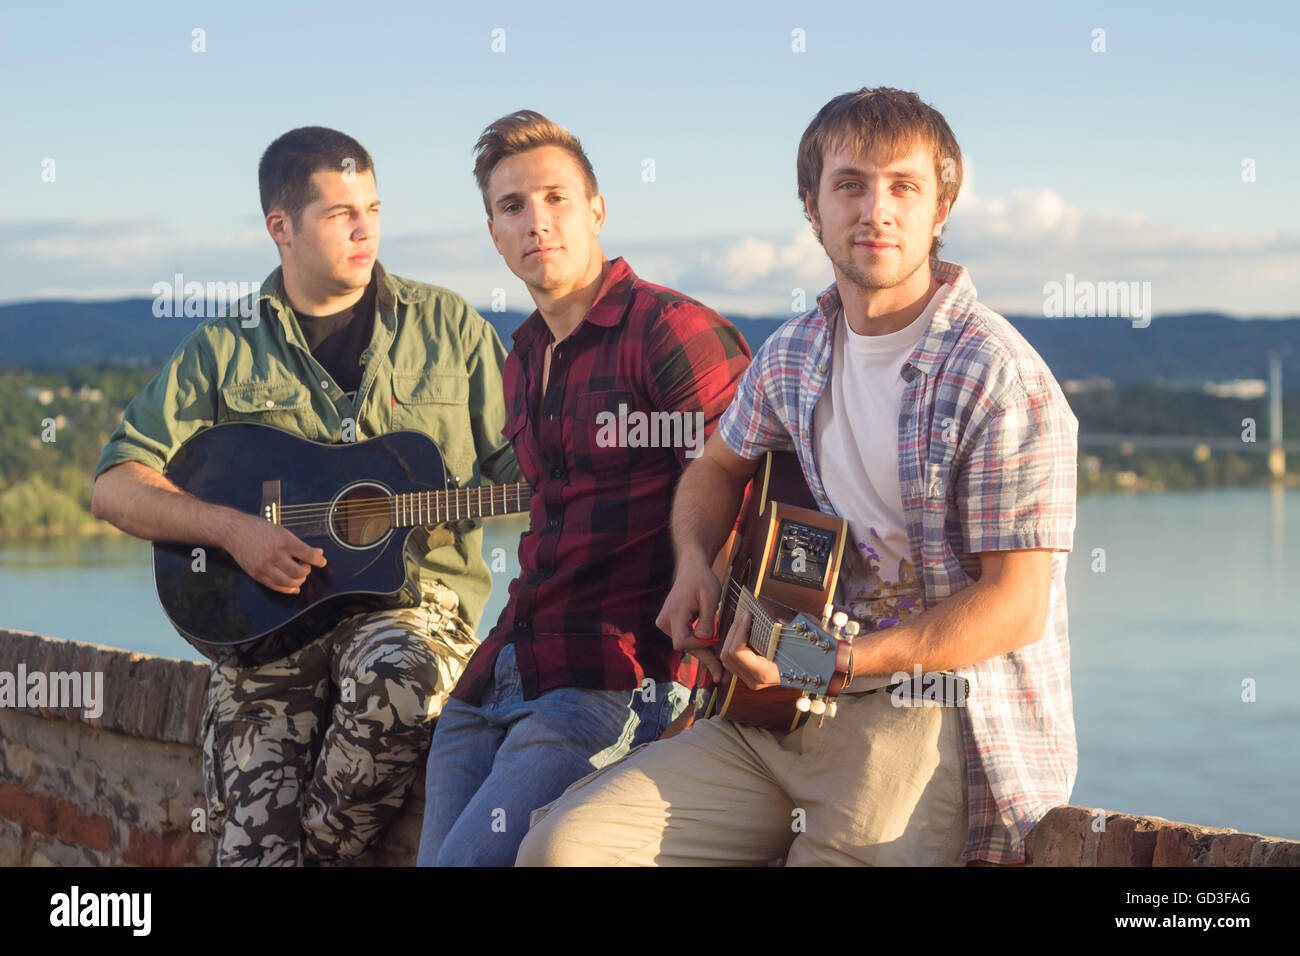 Three men casual music band playing with two guitars and singer, on a sunny day. Stock Photo